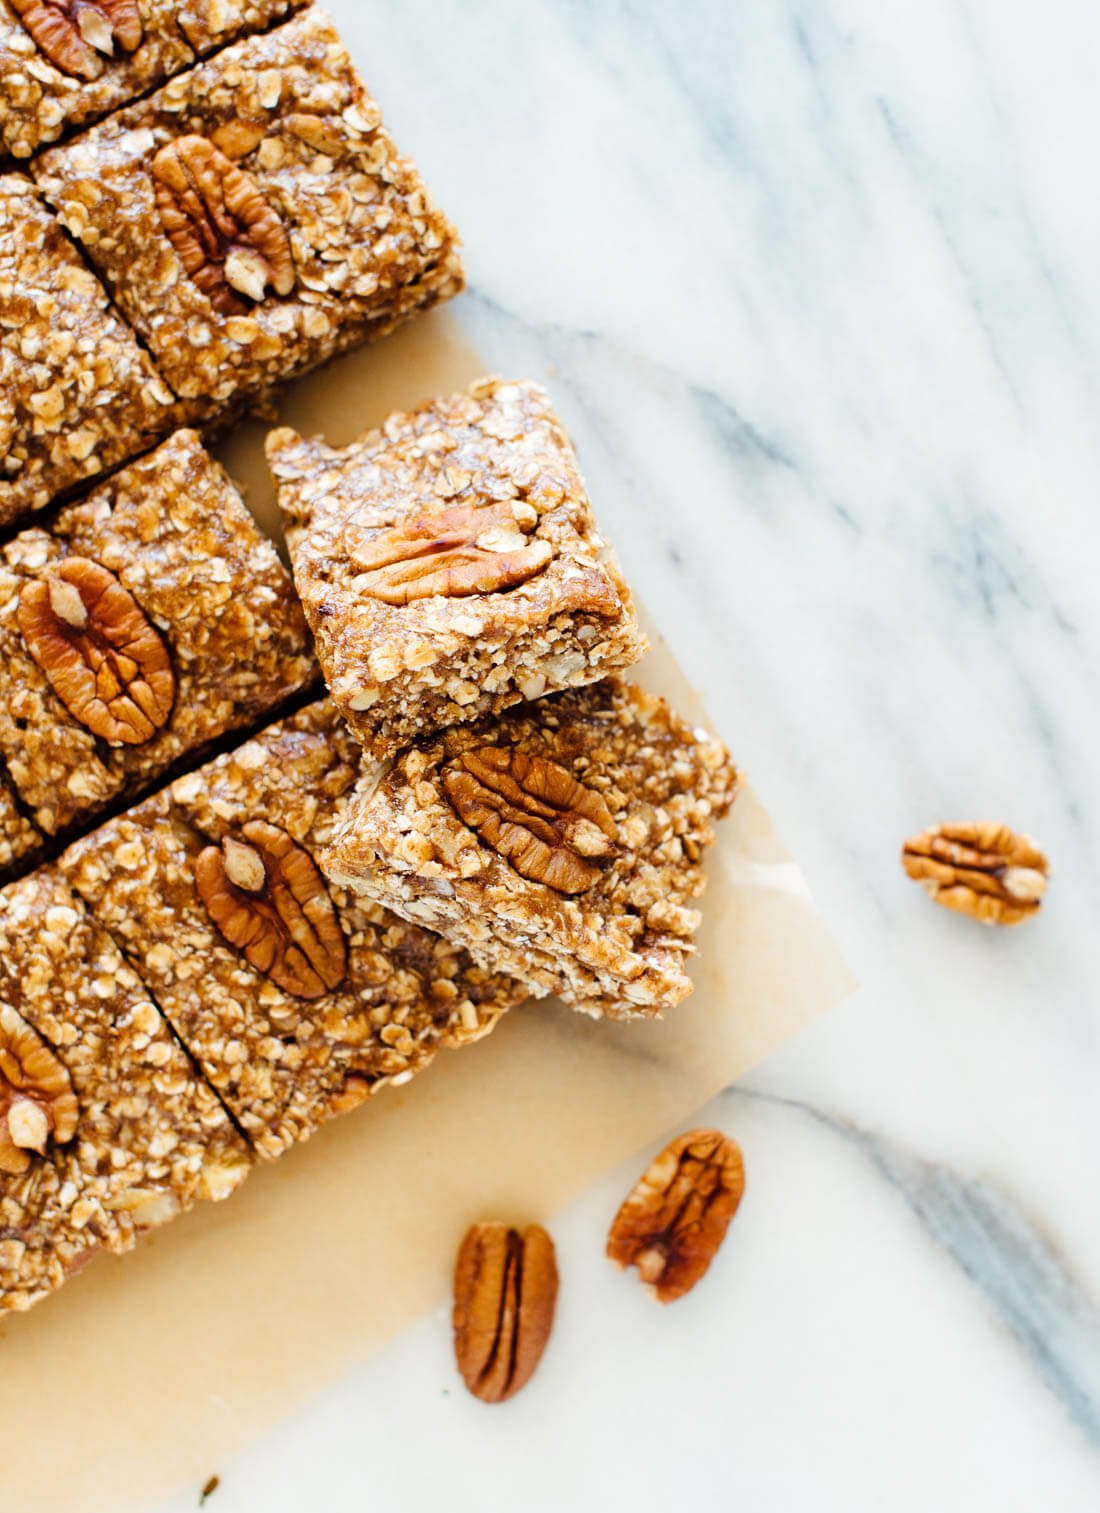 These homemade pecan granola bars are a delicious snack or breakfast! Store them in the freezer and you’ll always have a wholesome snack ready when you need it. 